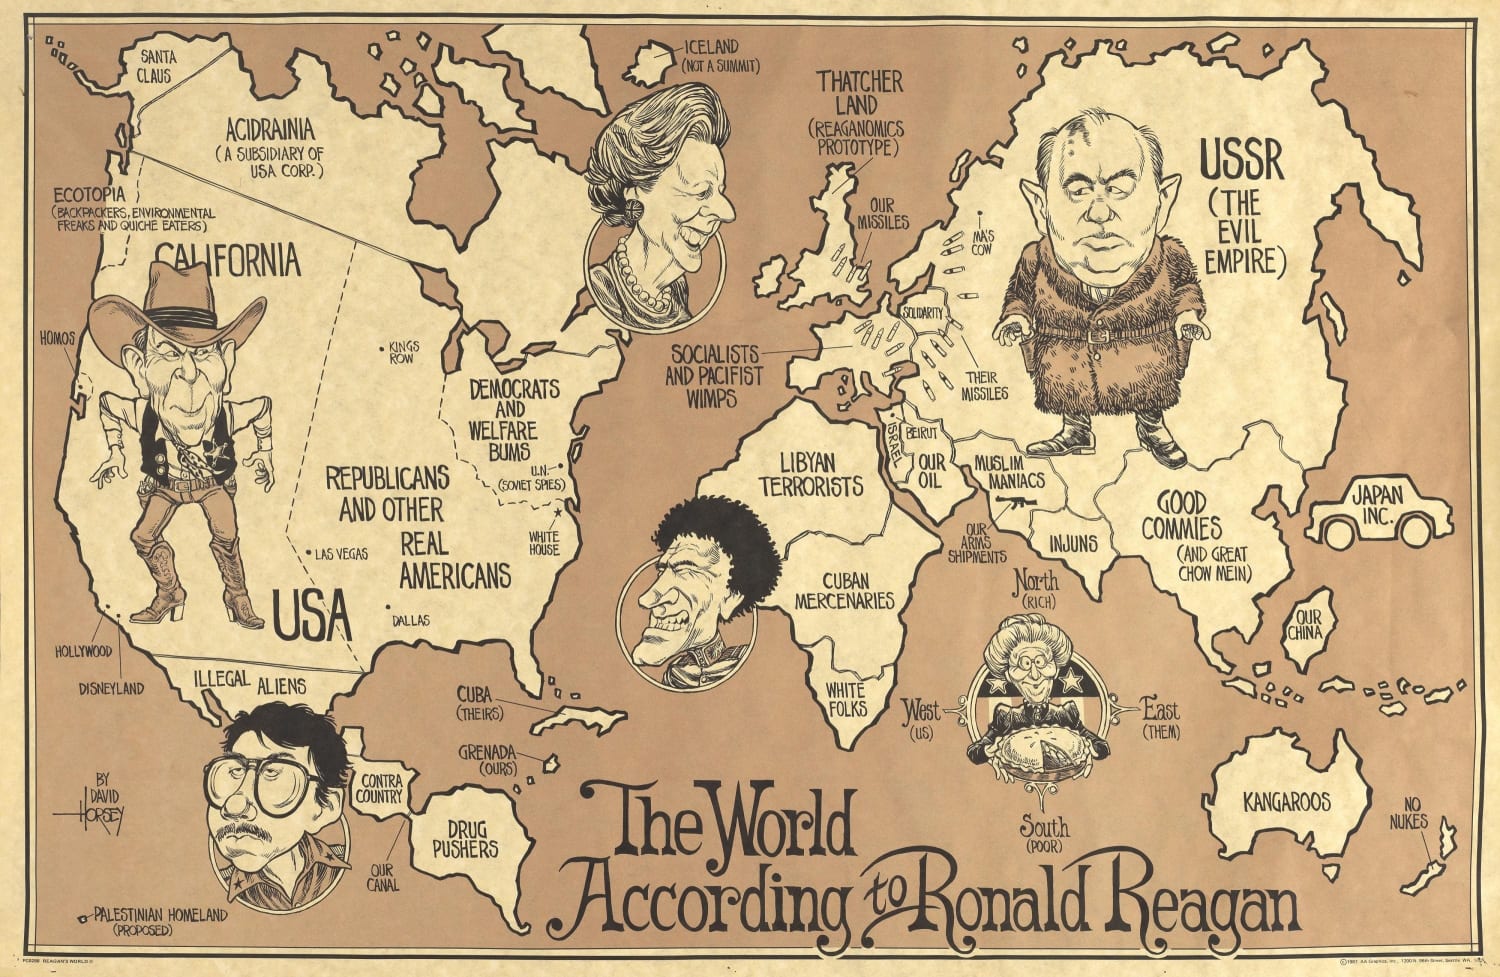 1987 map of The World According to Ronald Reagan